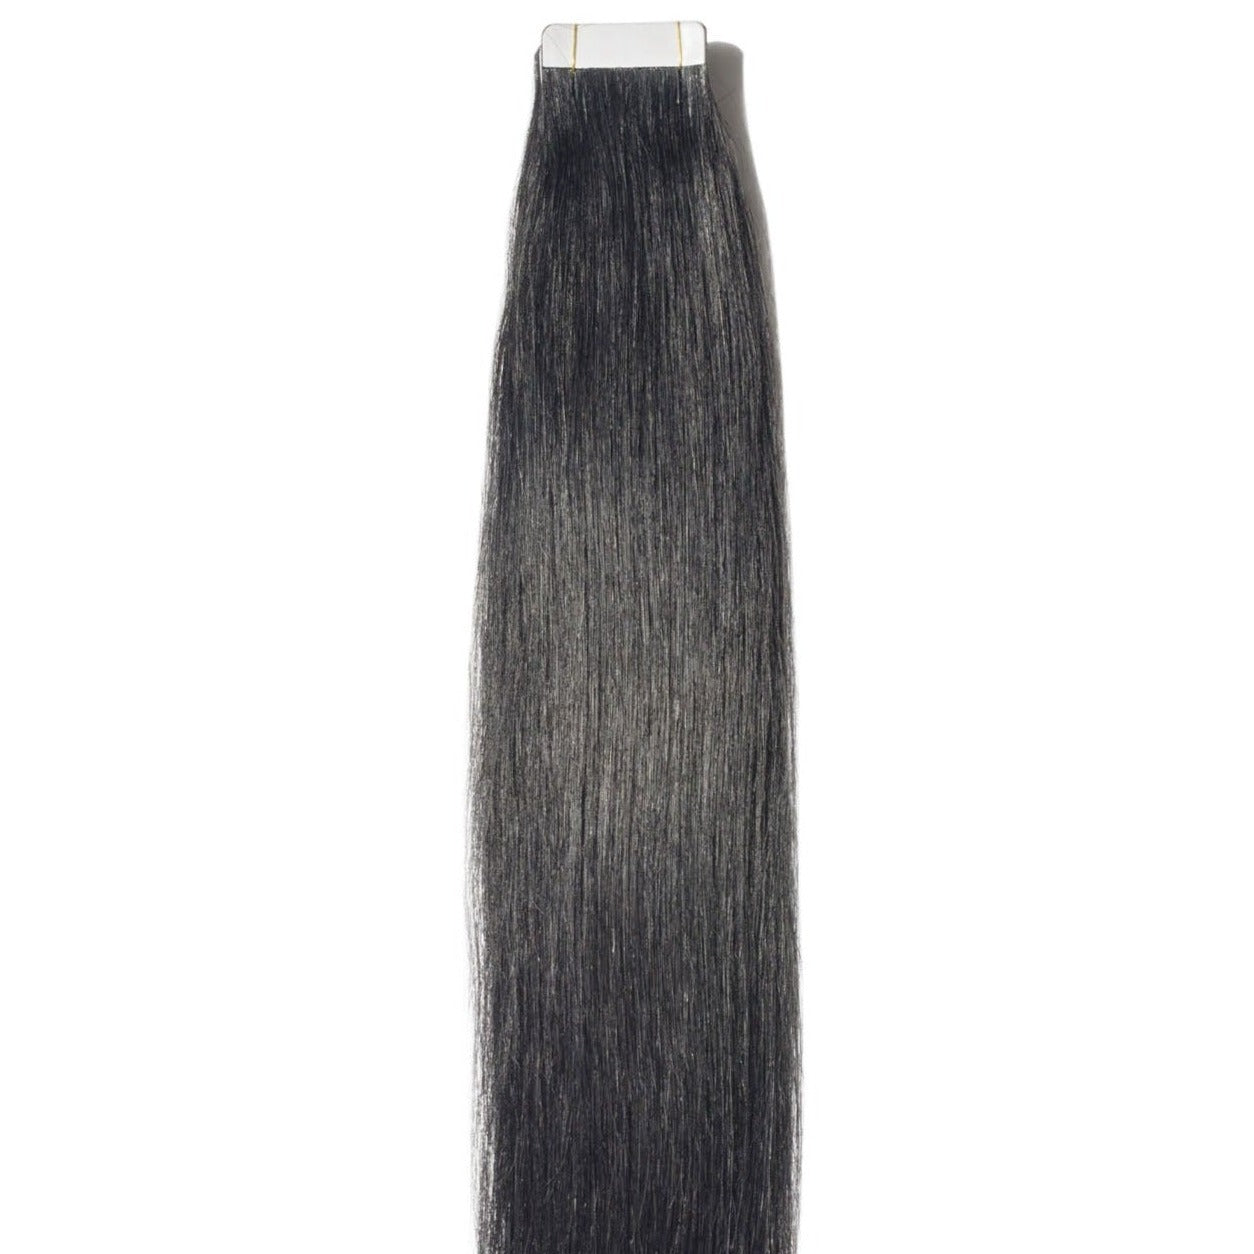 TAPE-IN HAIR EXTENSIONS